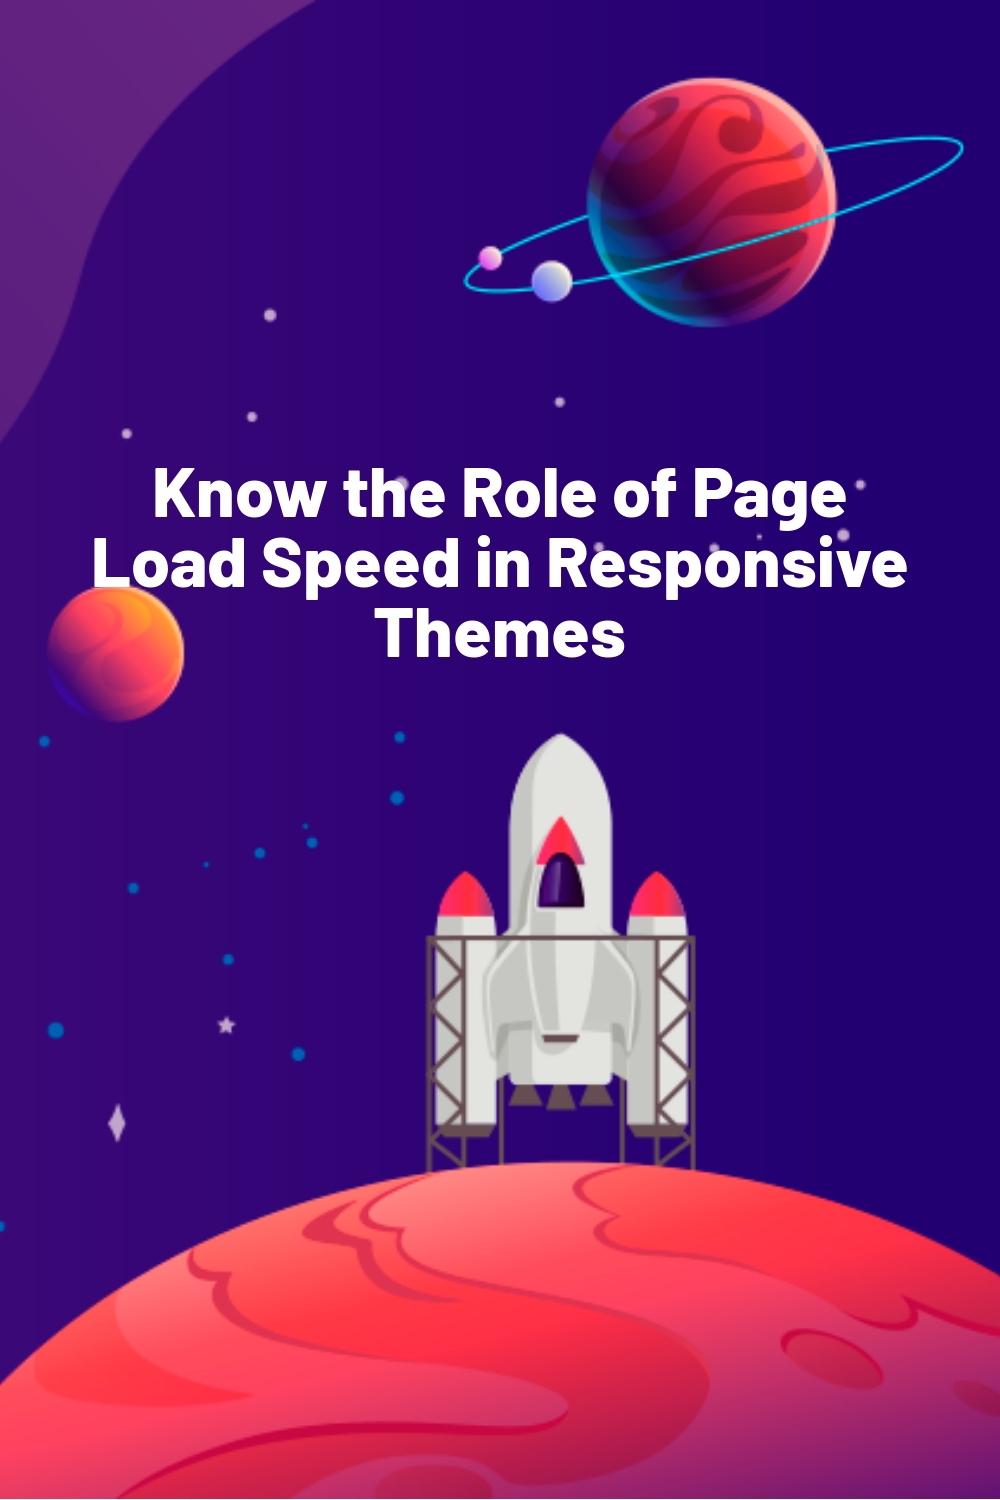 Know the Role of Page Load Speed in Responsive Themes